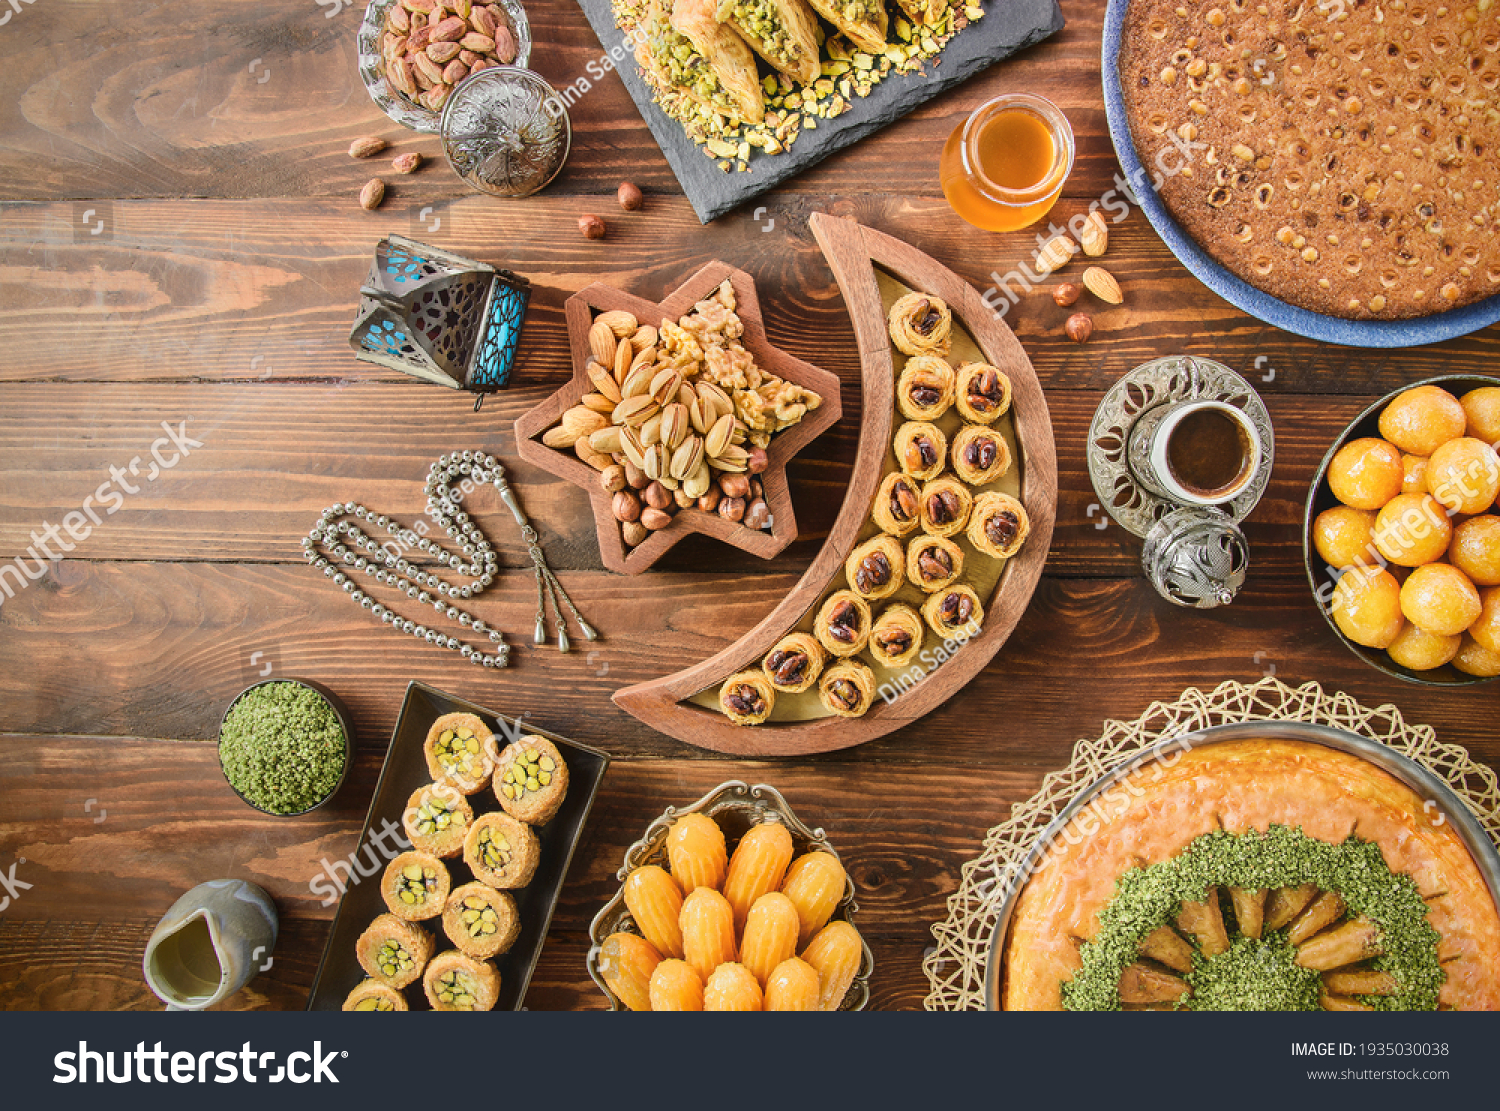 Arabic Cuisine: Middle Eastern desserts. Delicious collection of Ramadan traditional desserts. Served with tasty nuts, Arabic coffee, honey syrup and sugar syrup .Top view with close up. #1935030038